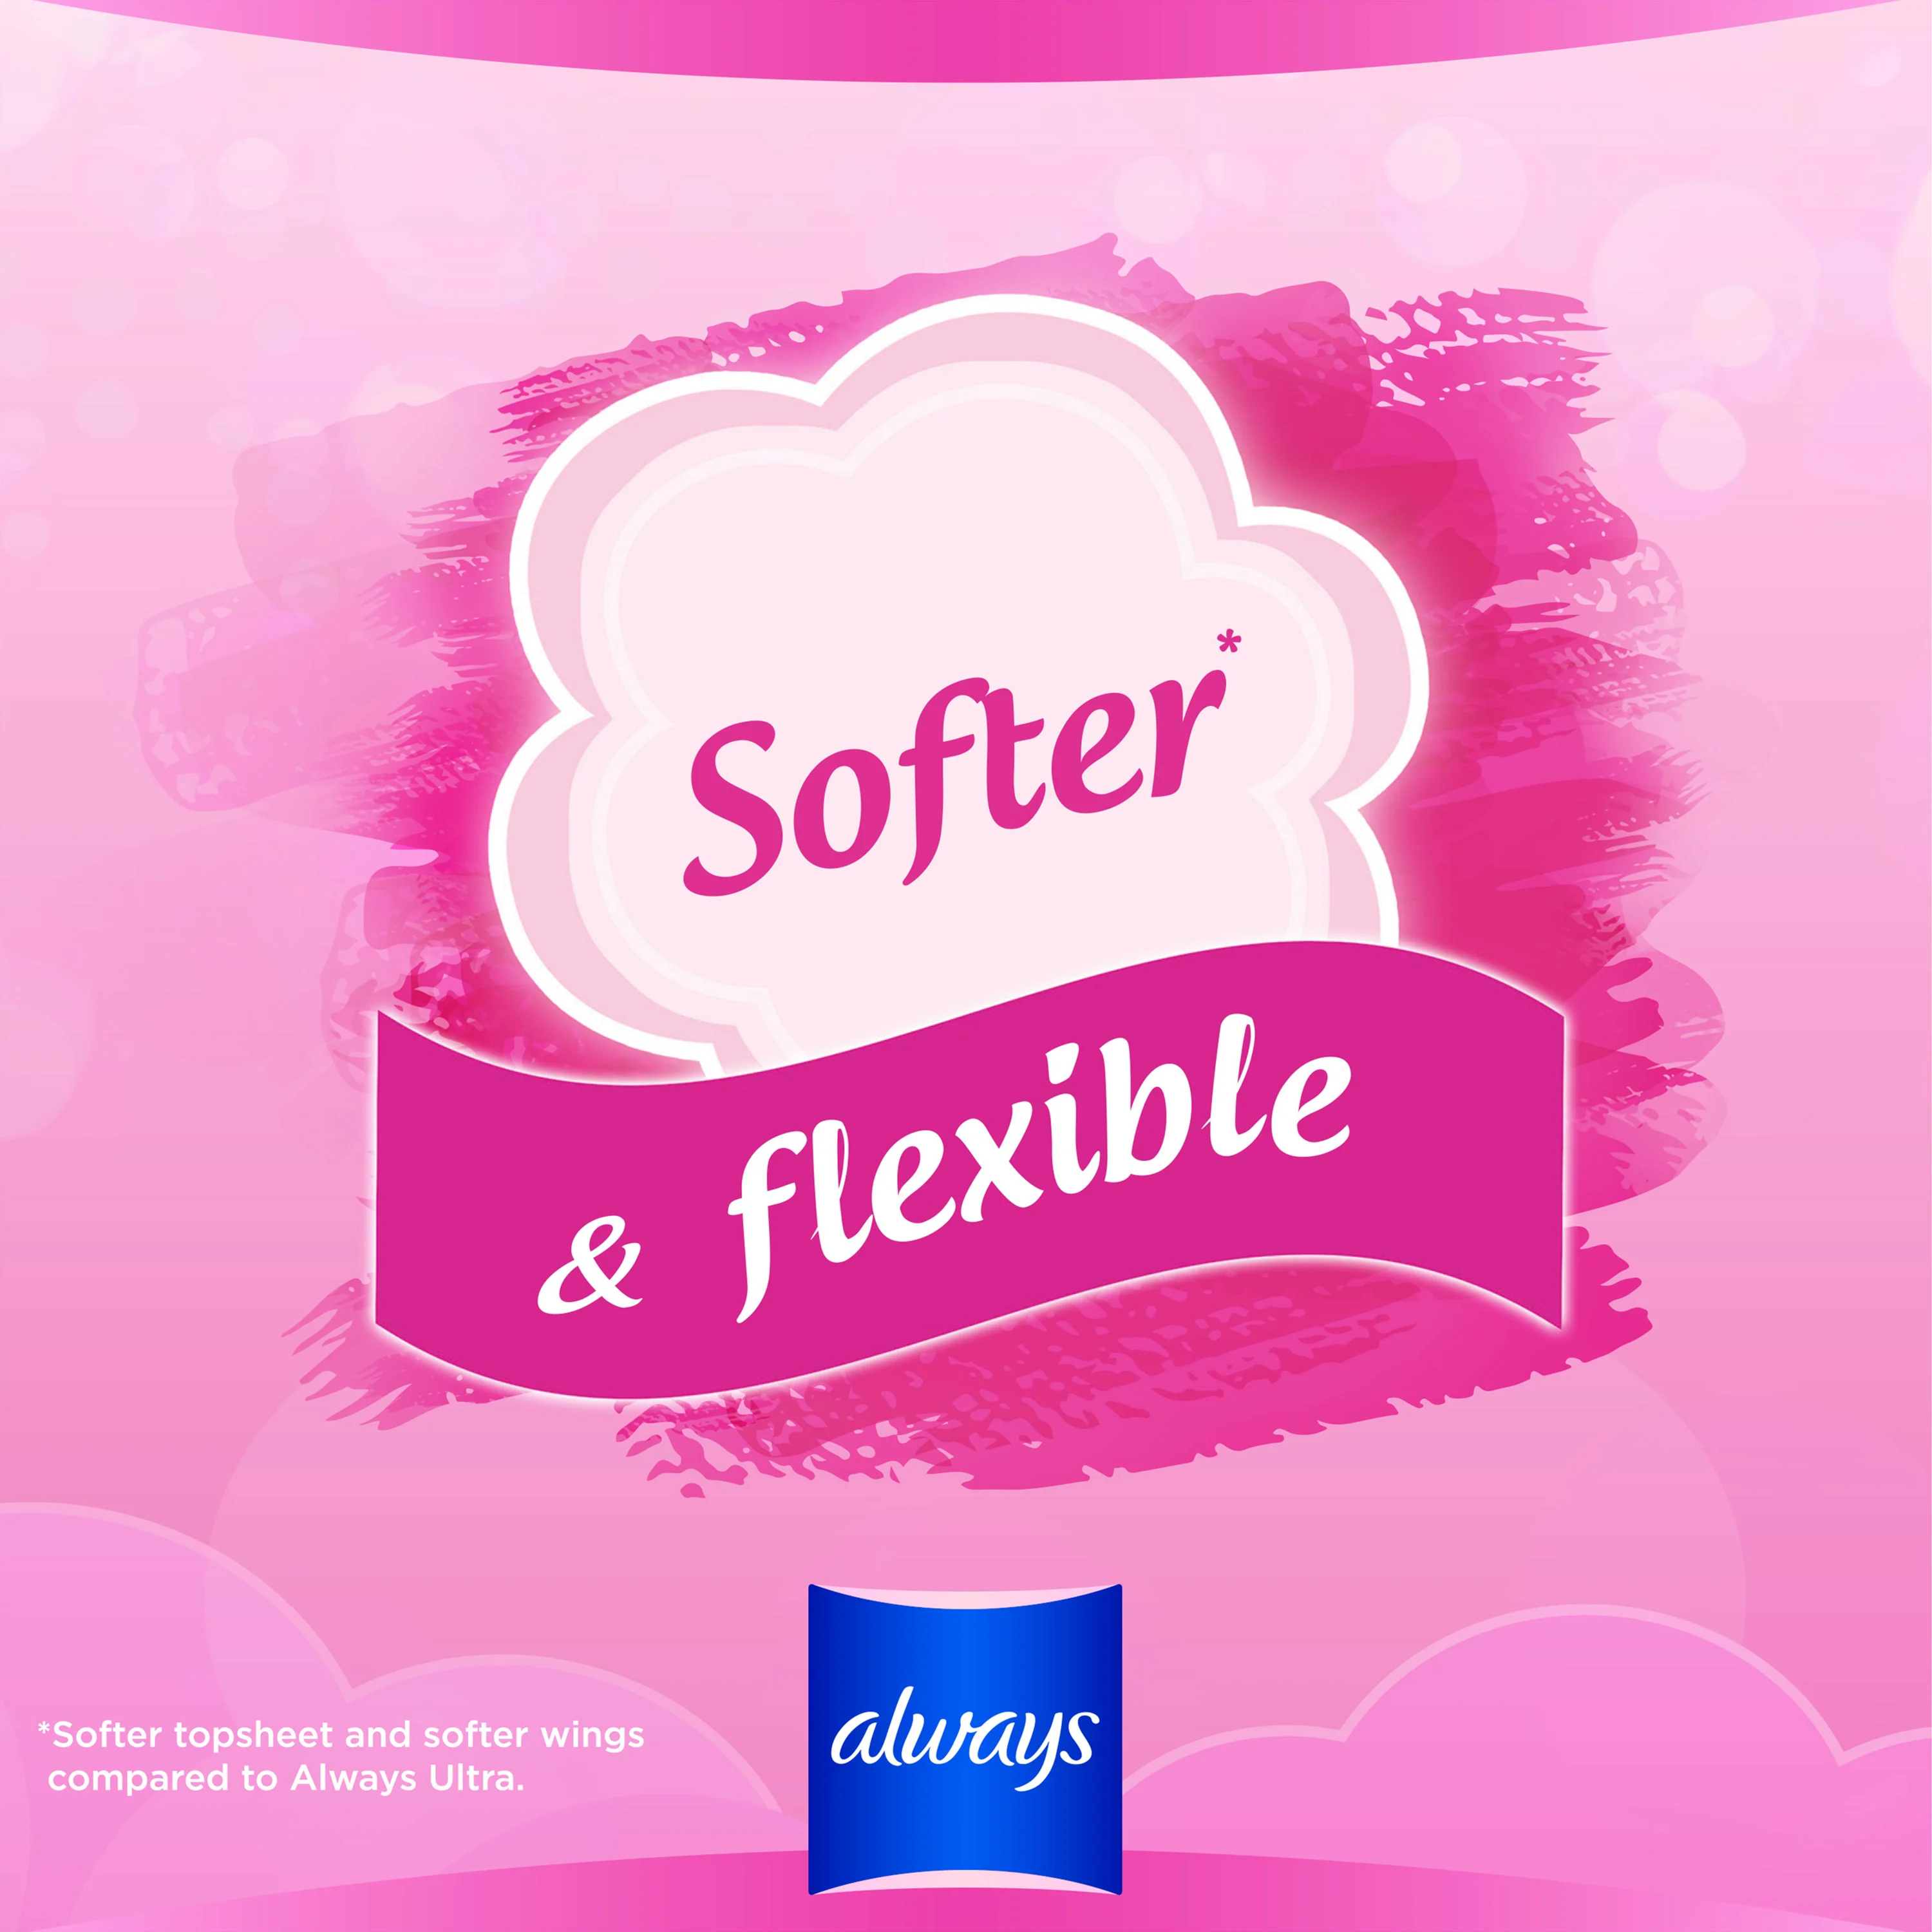 Always Sensitive is Softer* & flexible (*Softer topsheet and softer wings compared to Always Ultra)